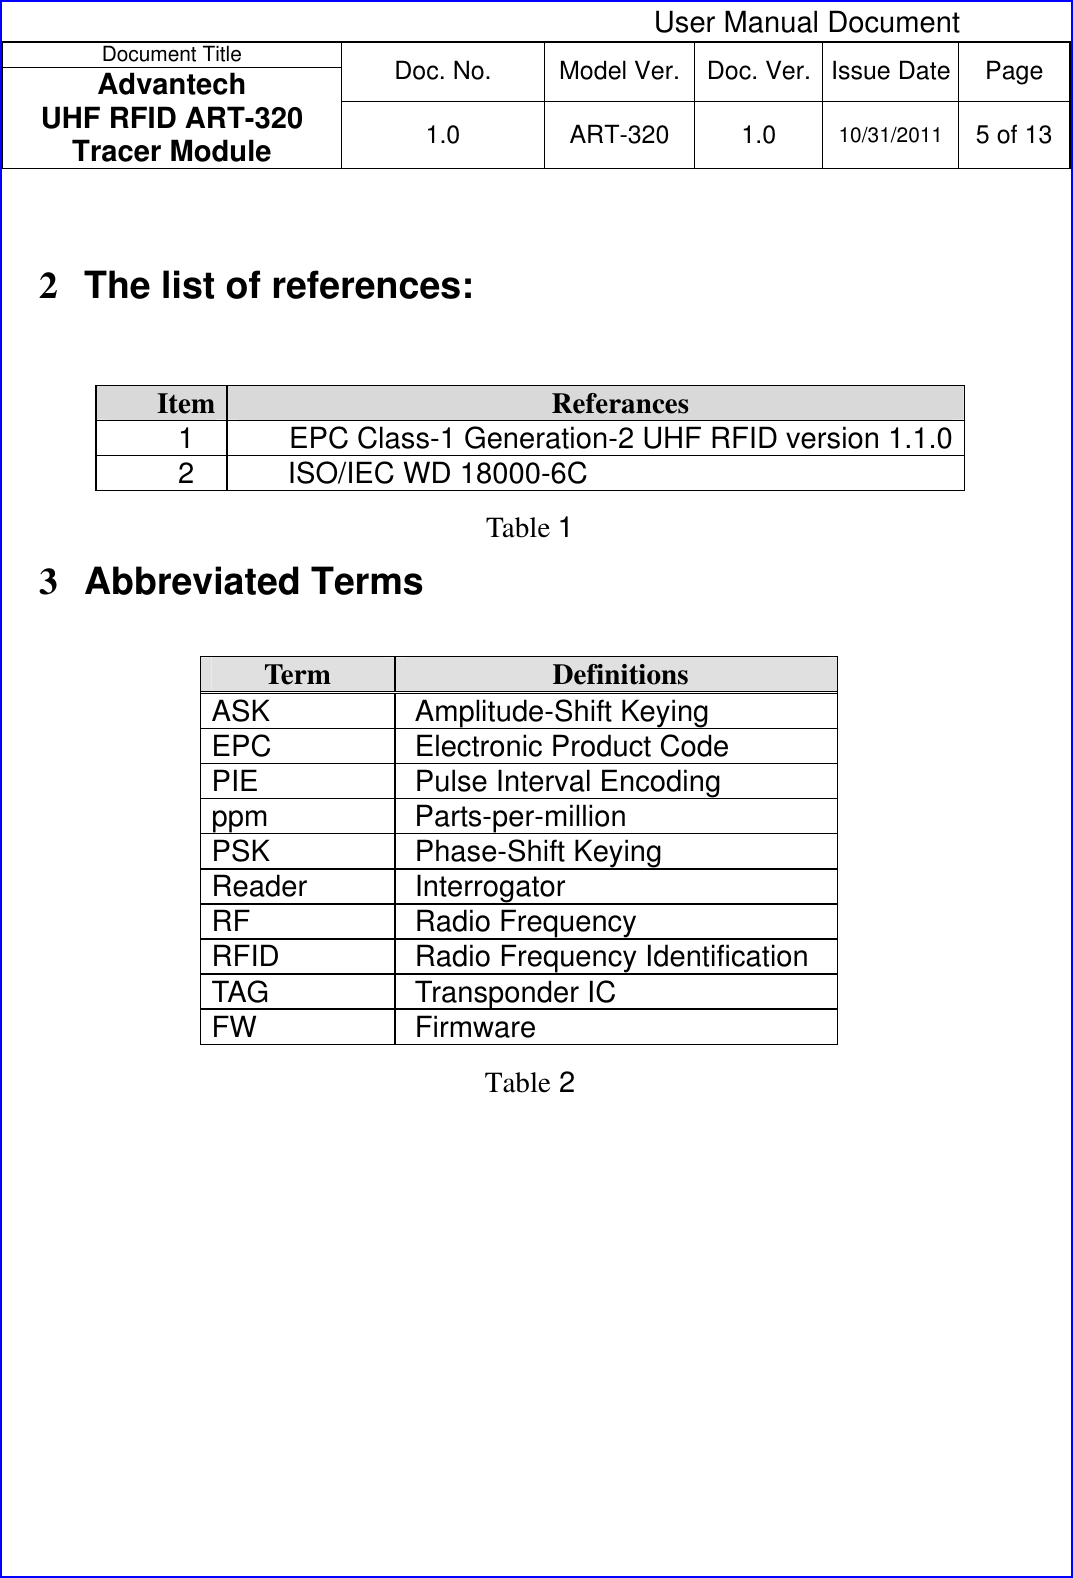  User Manual Document Document Title  Doc. No.  Model Ver. Doc. Ver.  Issue Date Page Advantech  UHF RFID ART-320 Tracer Module  1.0 ART-320 1.0 10/31/2011 5 of 13   2  The list of references:  Item  Referances 1  EPC Class-1 Generation-2 UHF RFID version 1.1.02 ISO/IEC WD 18000-6C Table 1 3  Abbreviated Terms  Term Definitions ASK Amplitude-Shift Keying EPC  Electronic Product Code PIE  Pulse Interval Encoding ppm Parts-per-million PSK Phase-Shift Keying Reader Interrogator RF Radio Frequency RFID  Radio Frequency Identification TAG Transponder IC FW Firmware Table 2  